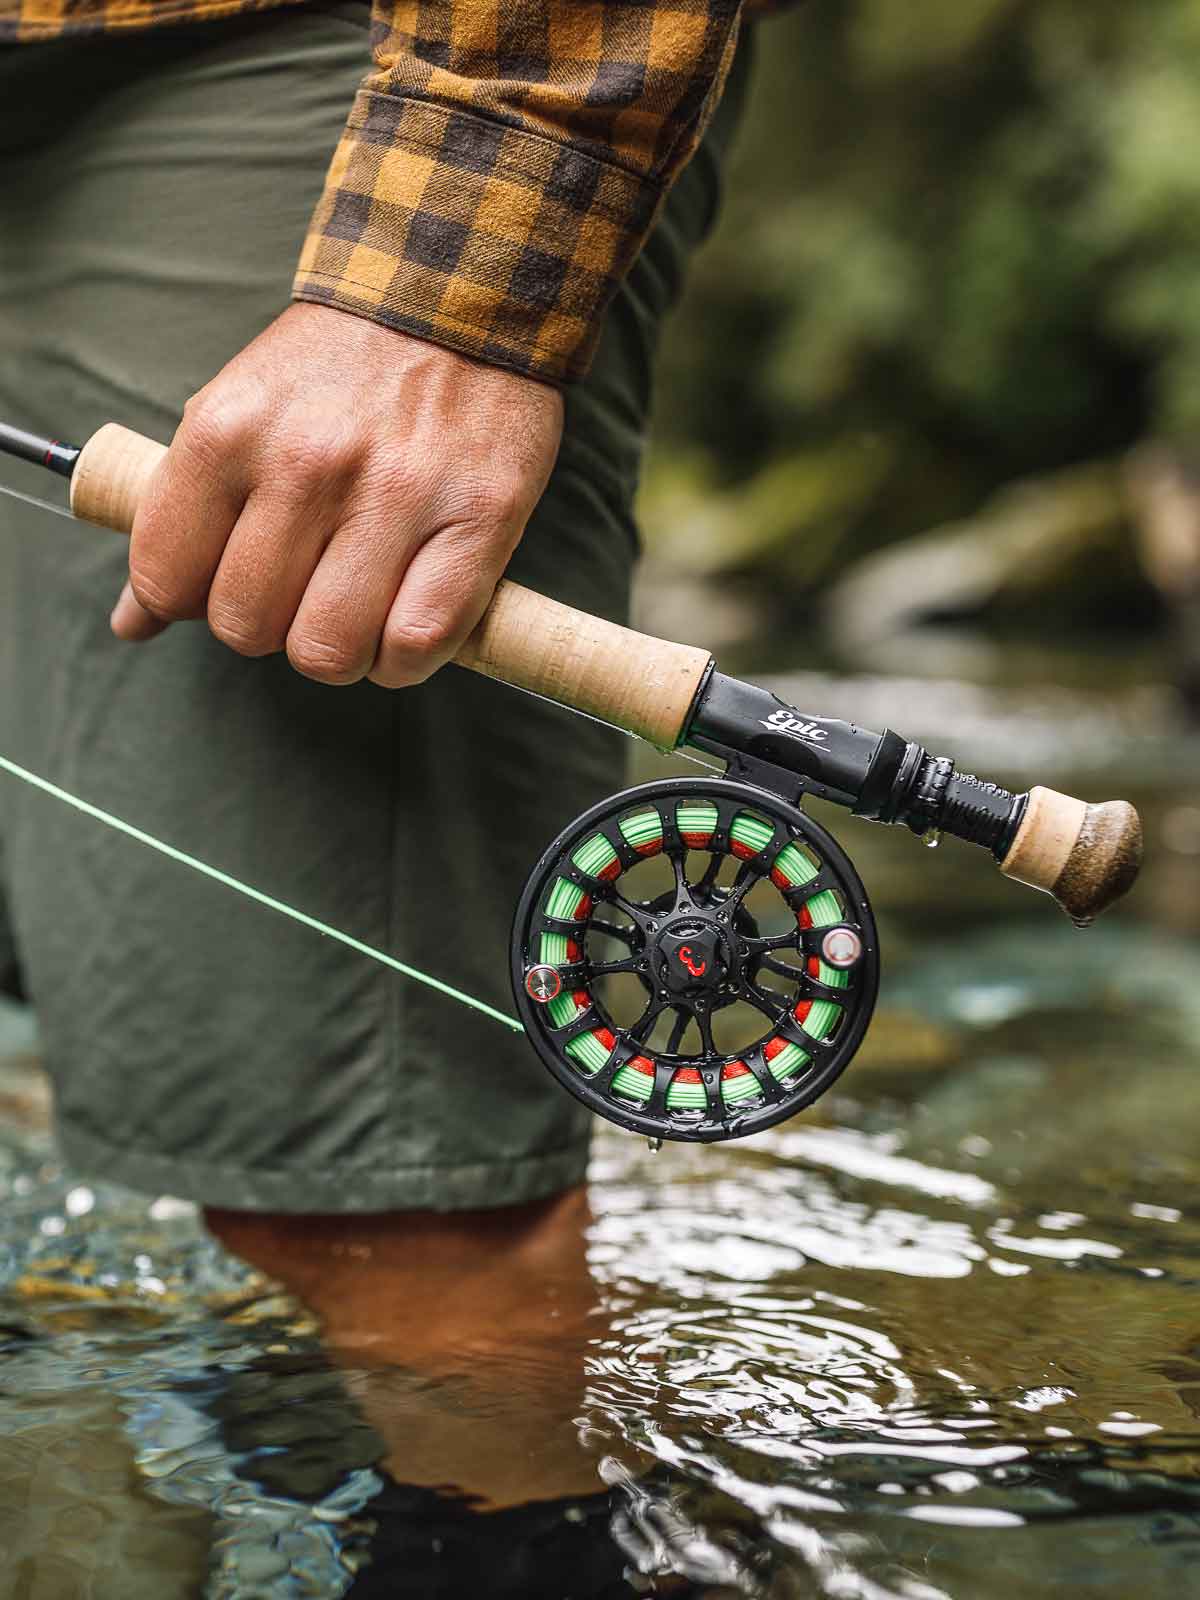 Best 3 Weight Fly Rods (For Trout Fishing) 